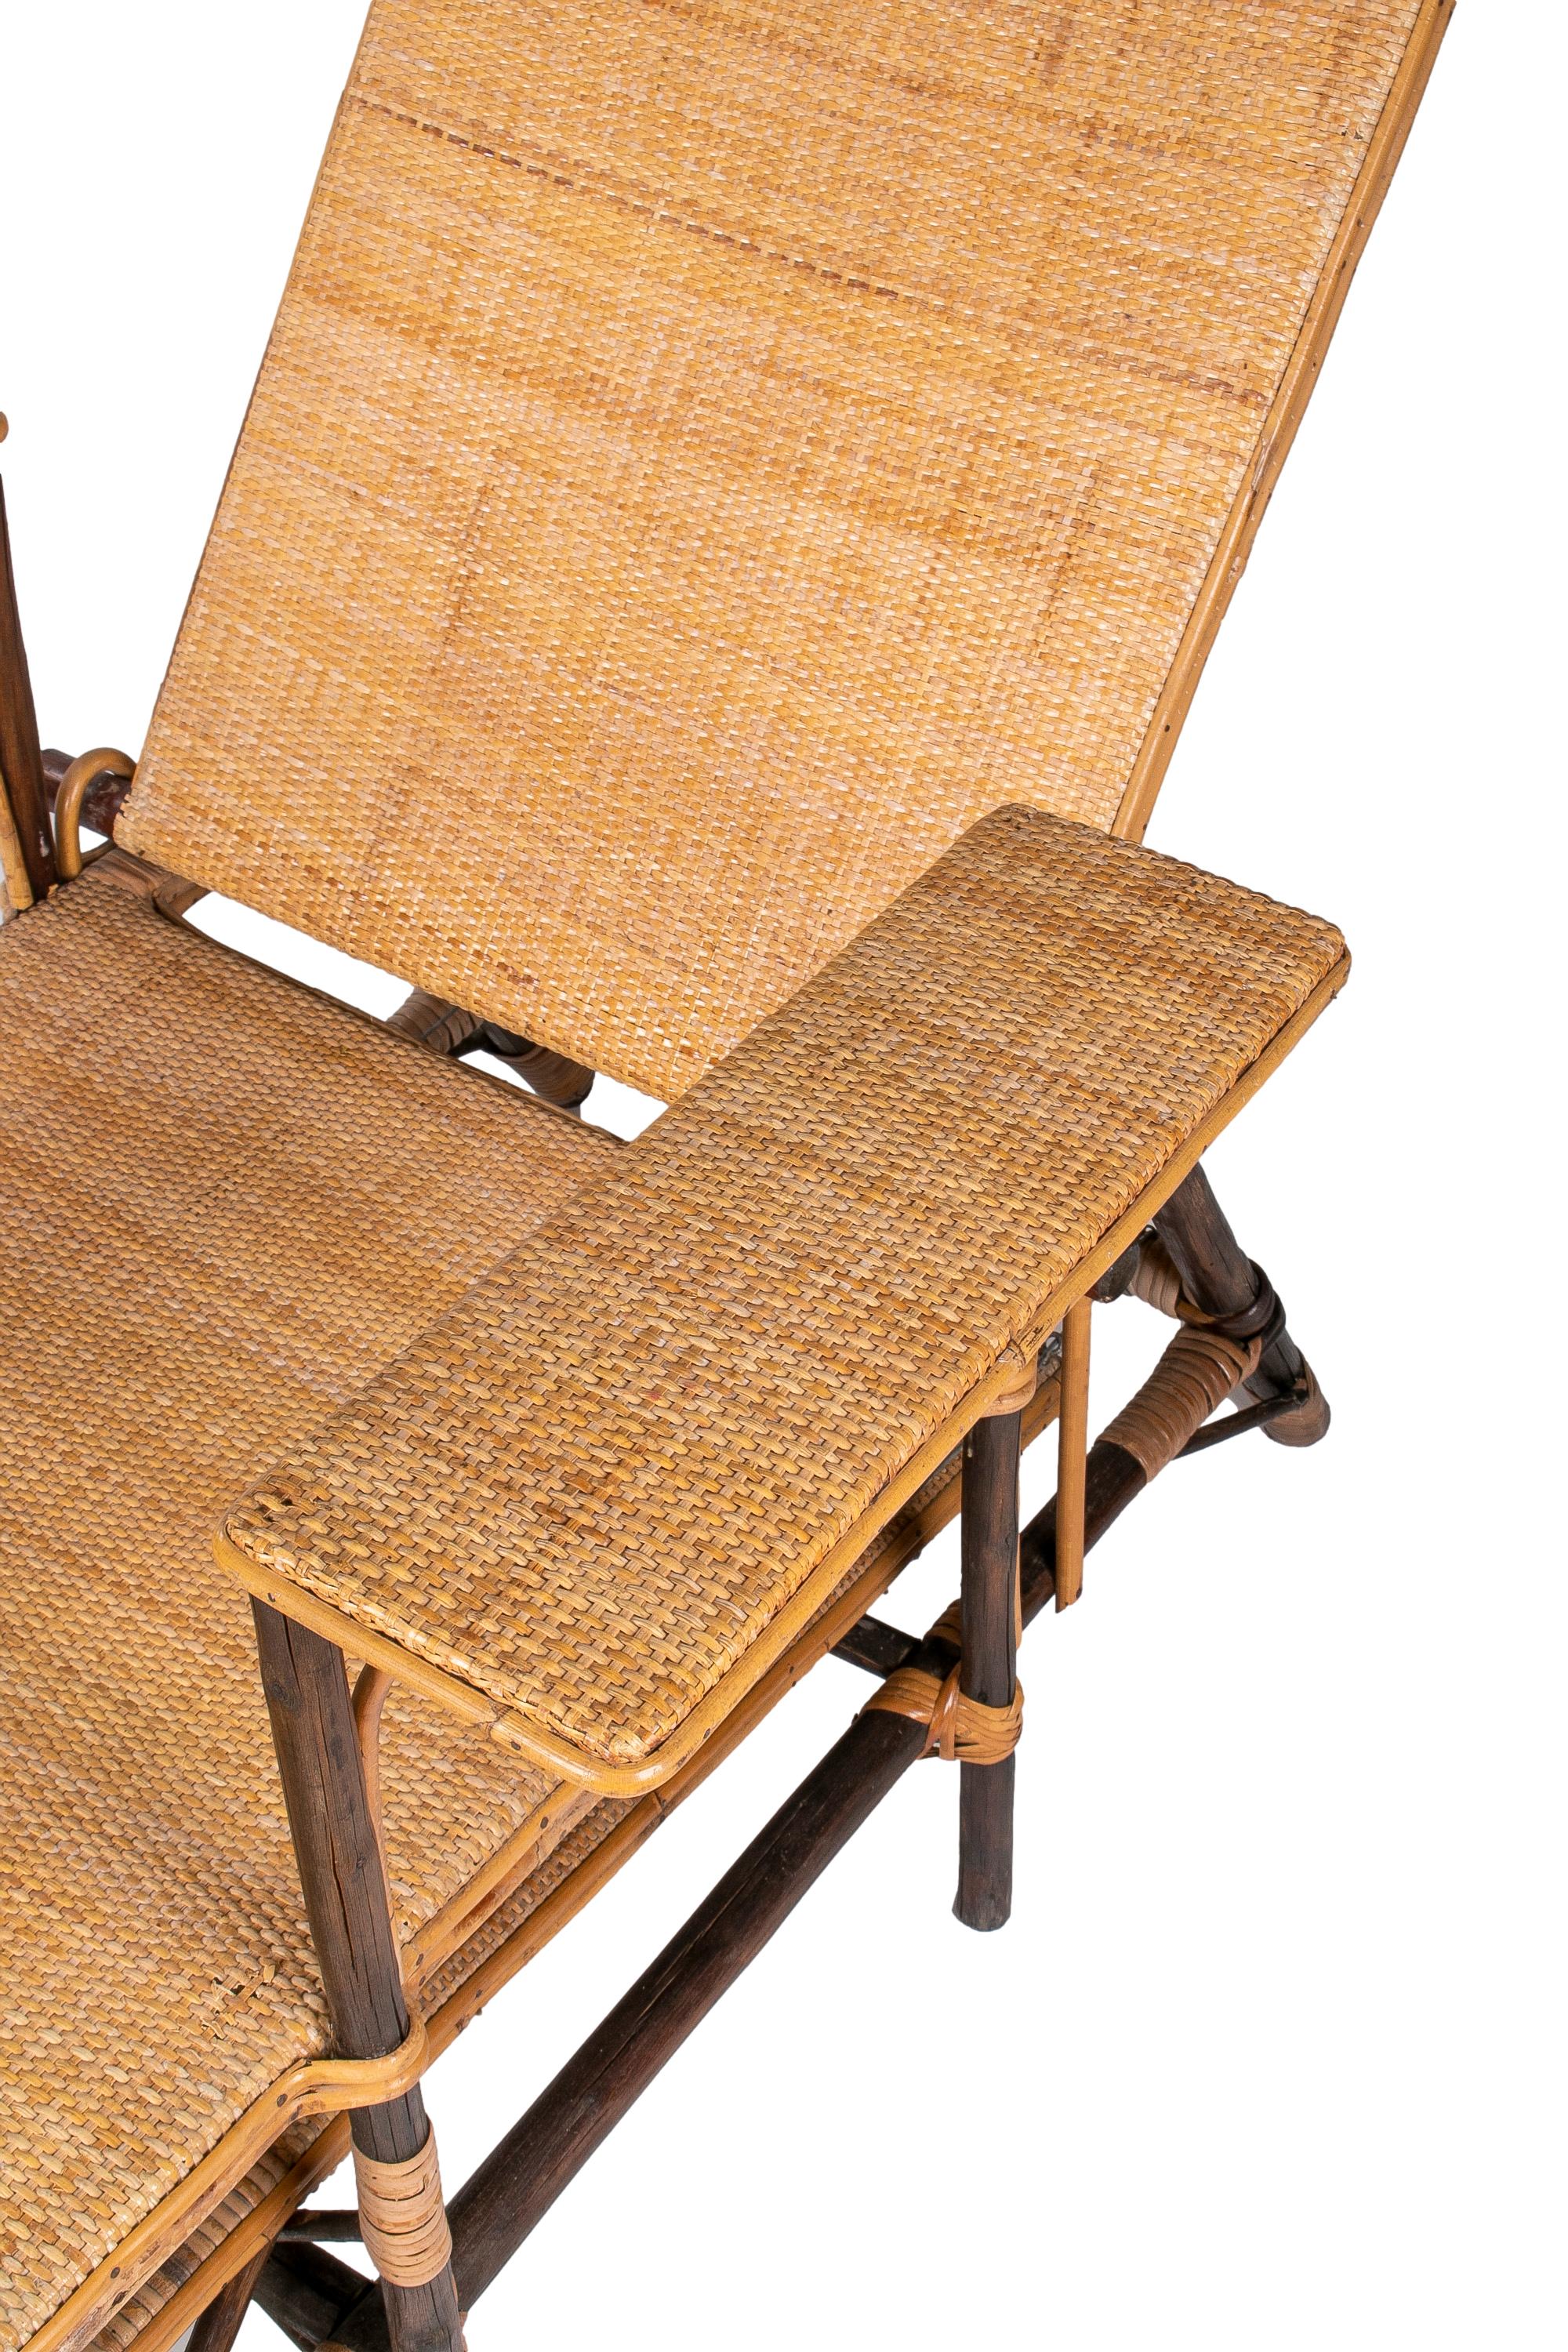 1980s Spanish Woven Wicker & Bamboo Sunbathing Lounge Chair For Sale 6